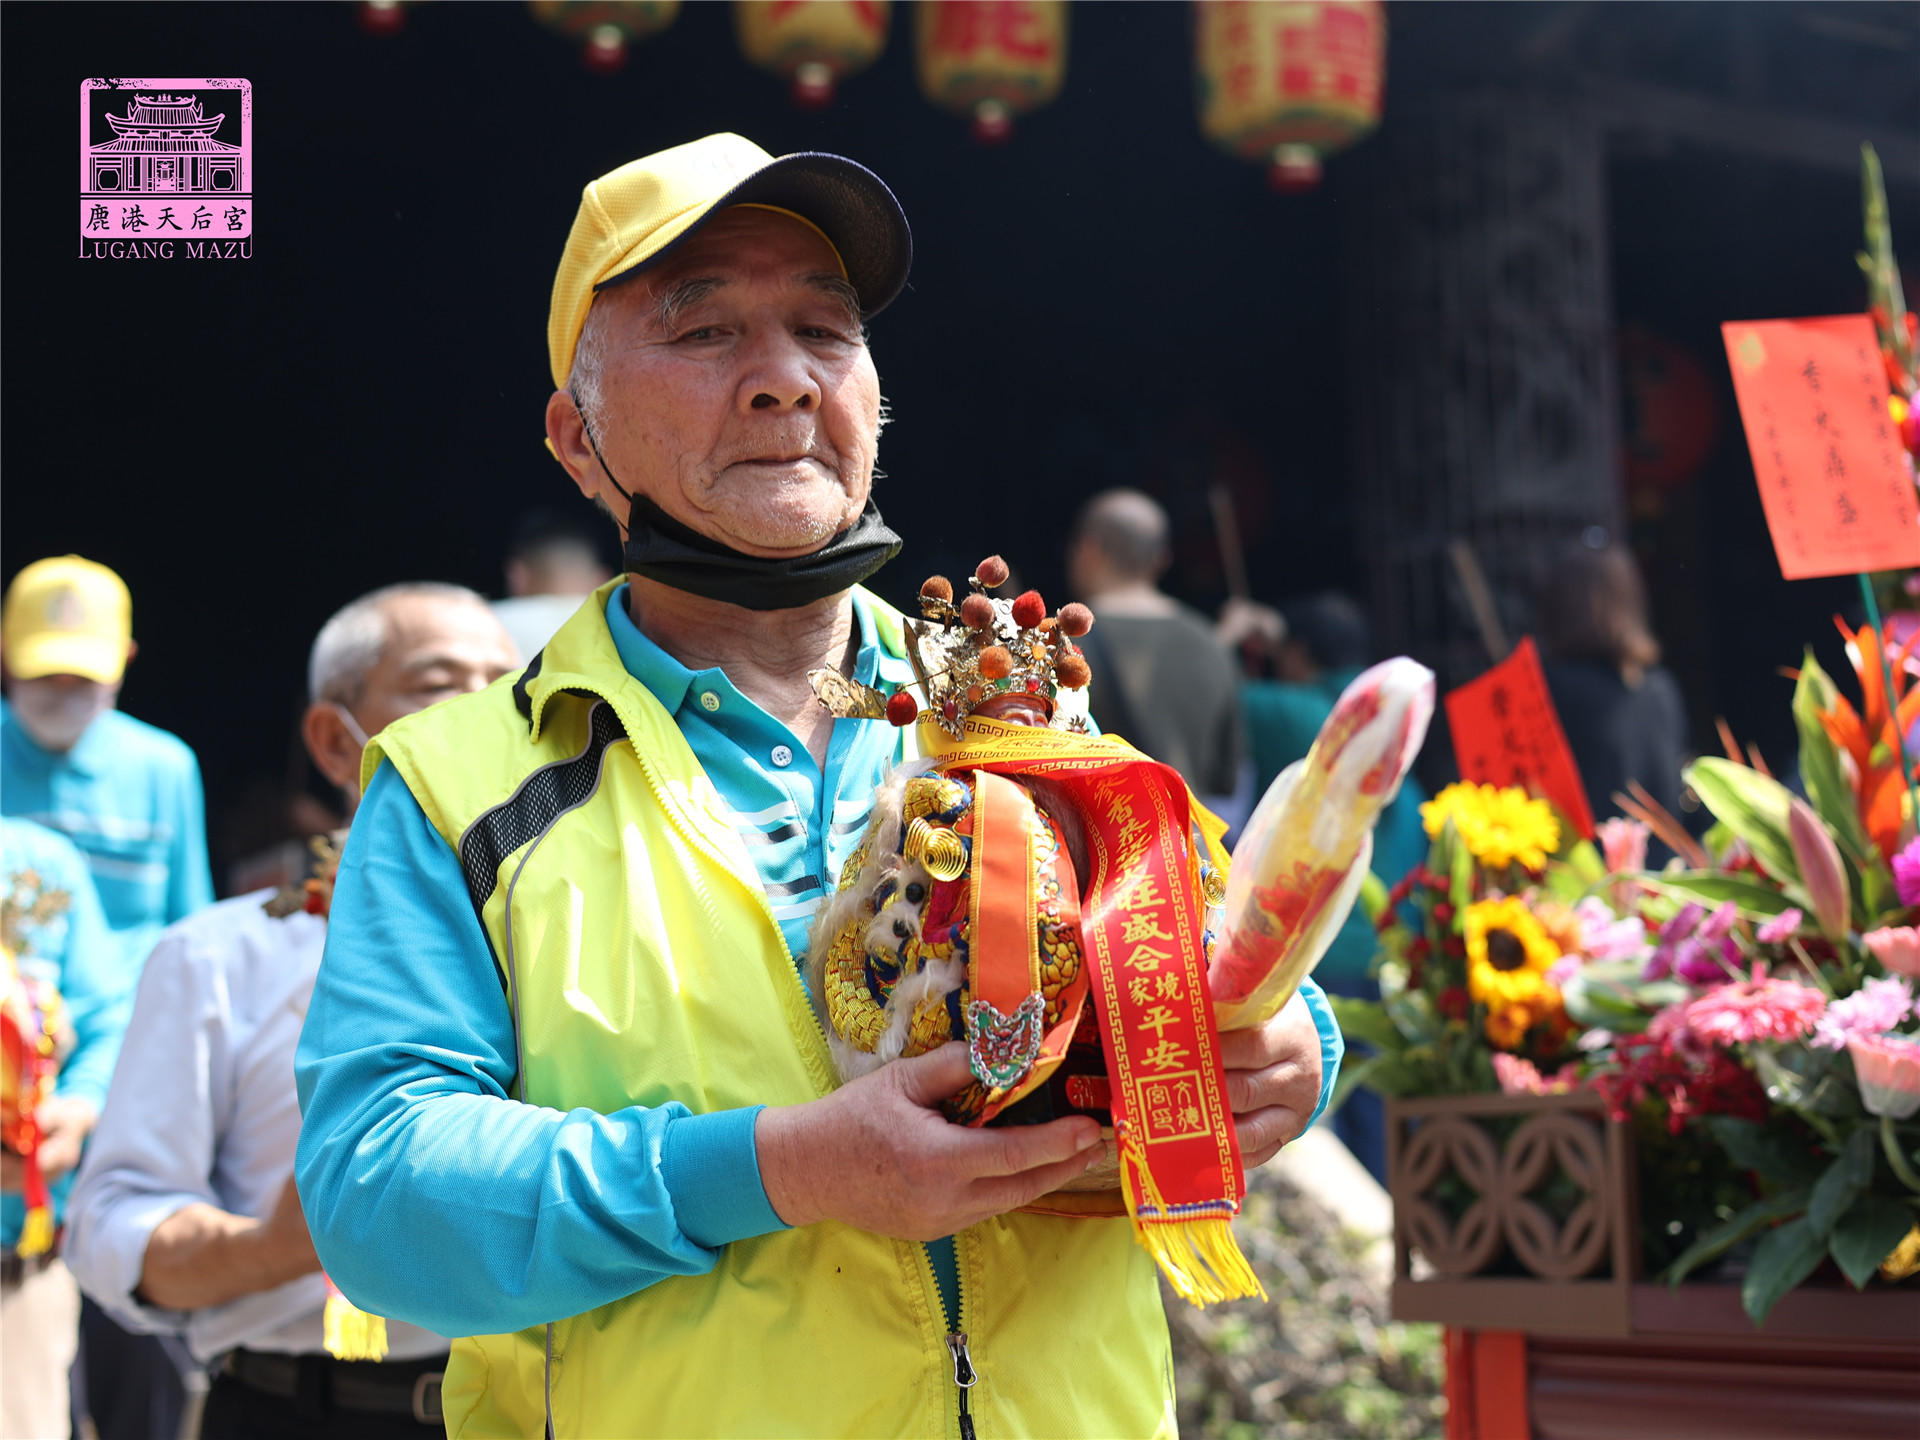 Read more about the article 台中市 大甲庄尾福德祠